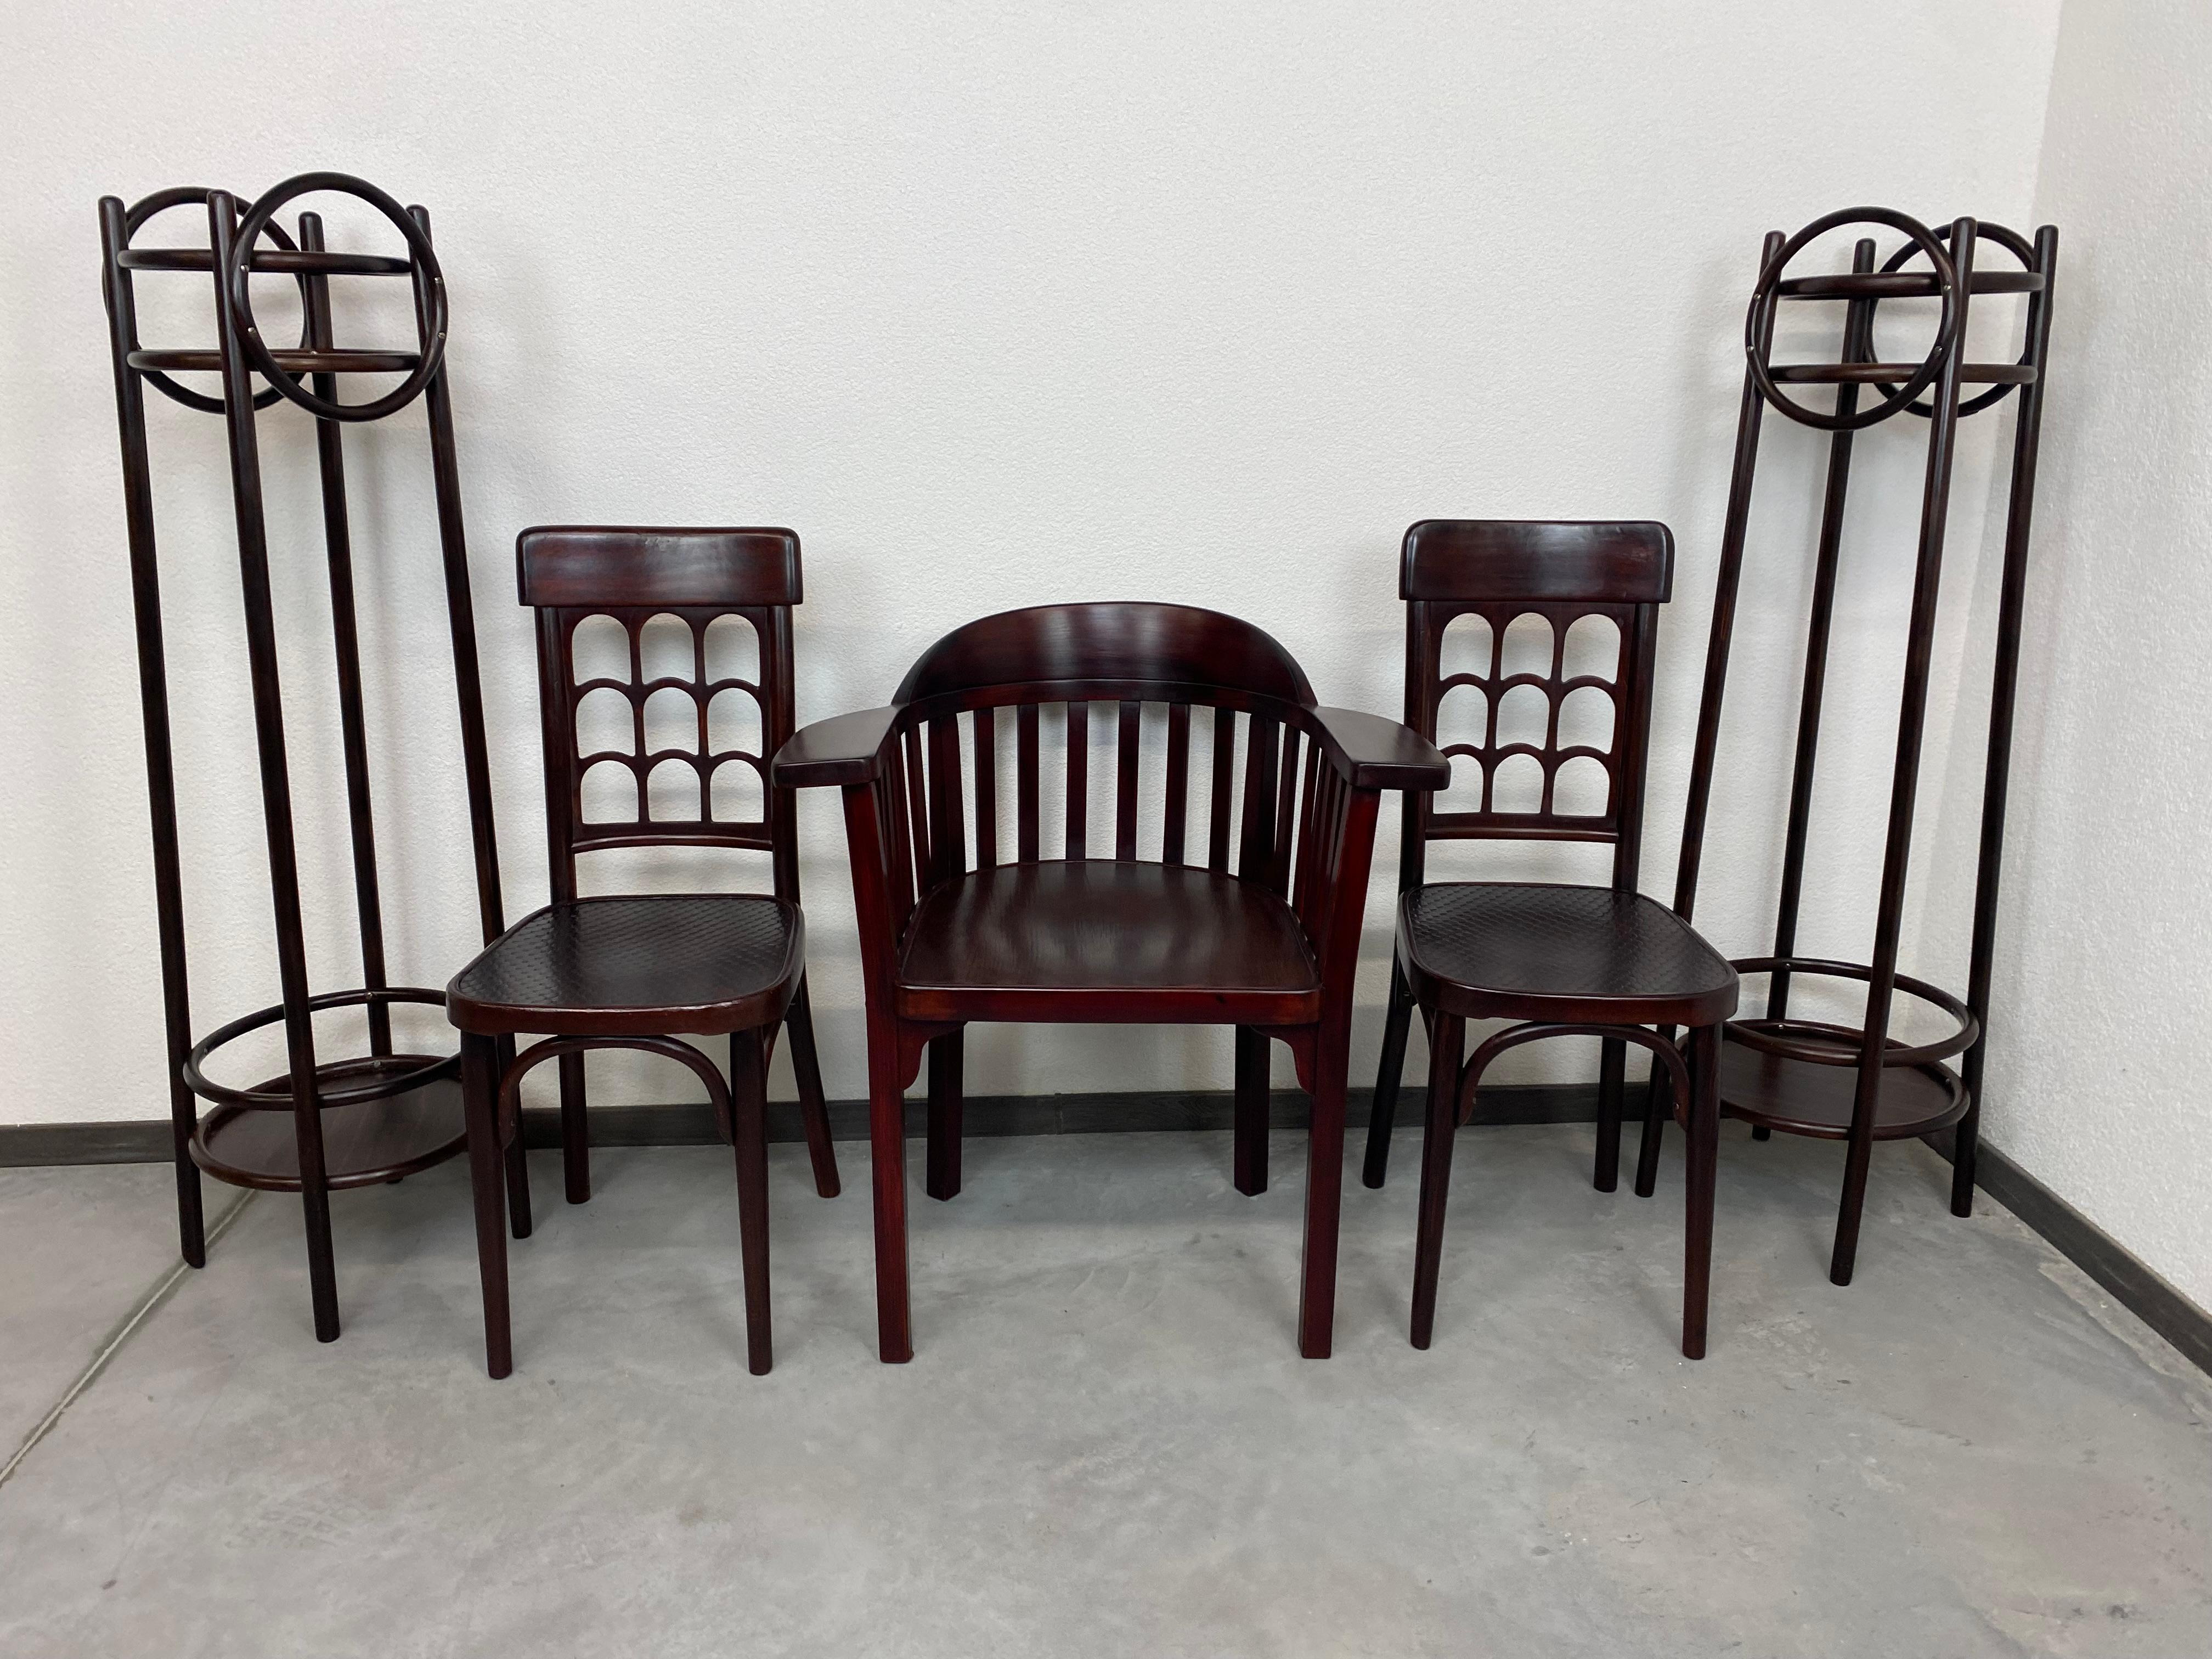 Bentwood plant stands by Thonet professionally stained and repolished.